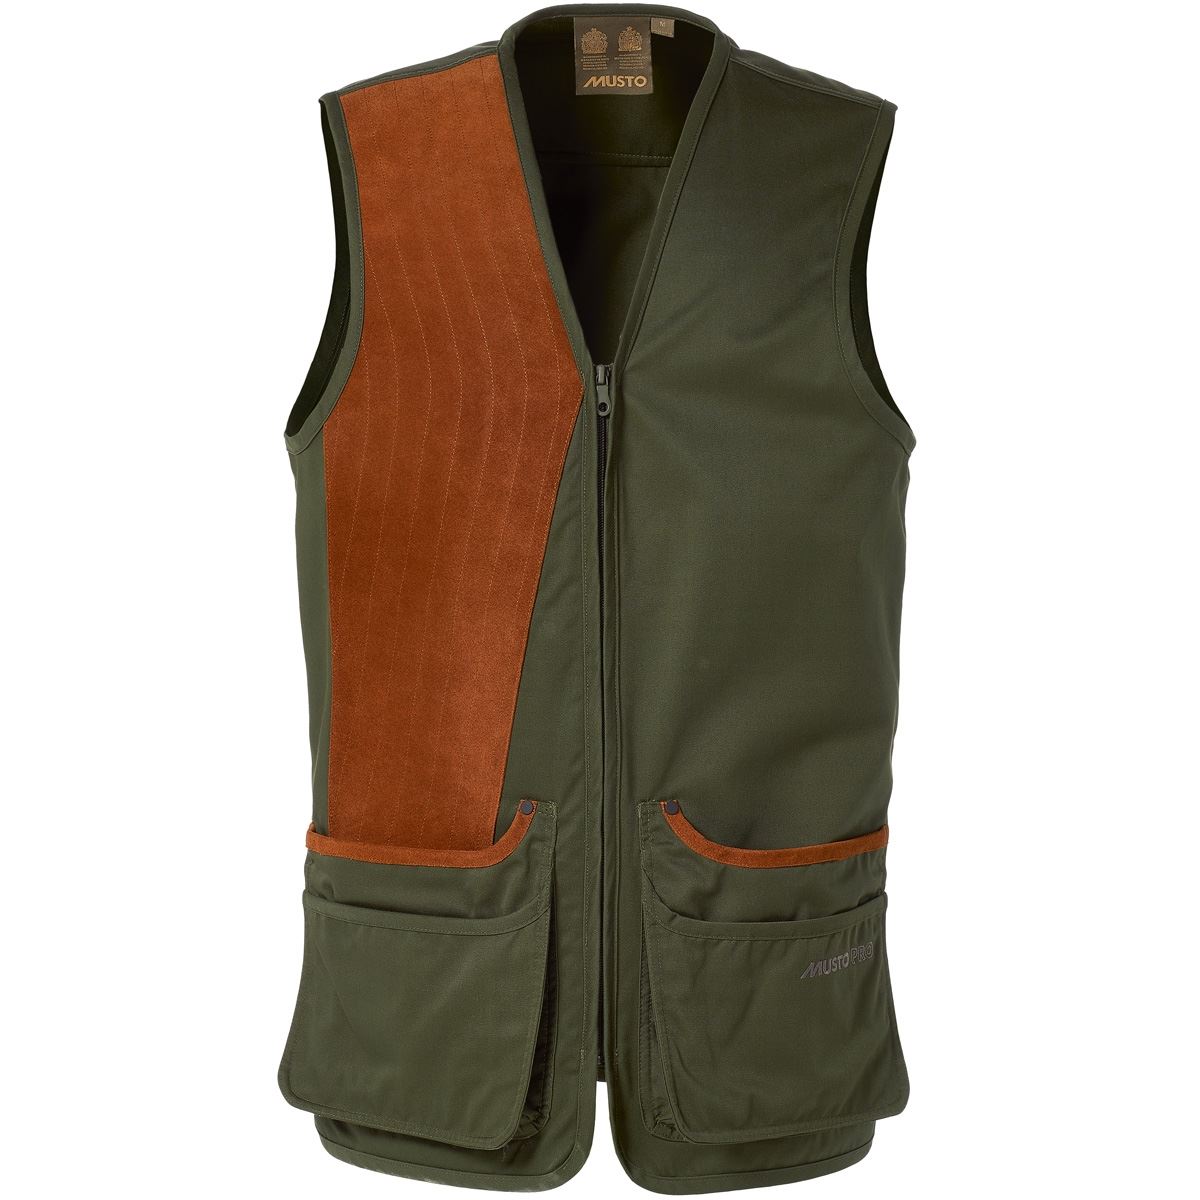 Is it easy to access items below the cartridge pockets of the Musto shooting vest?